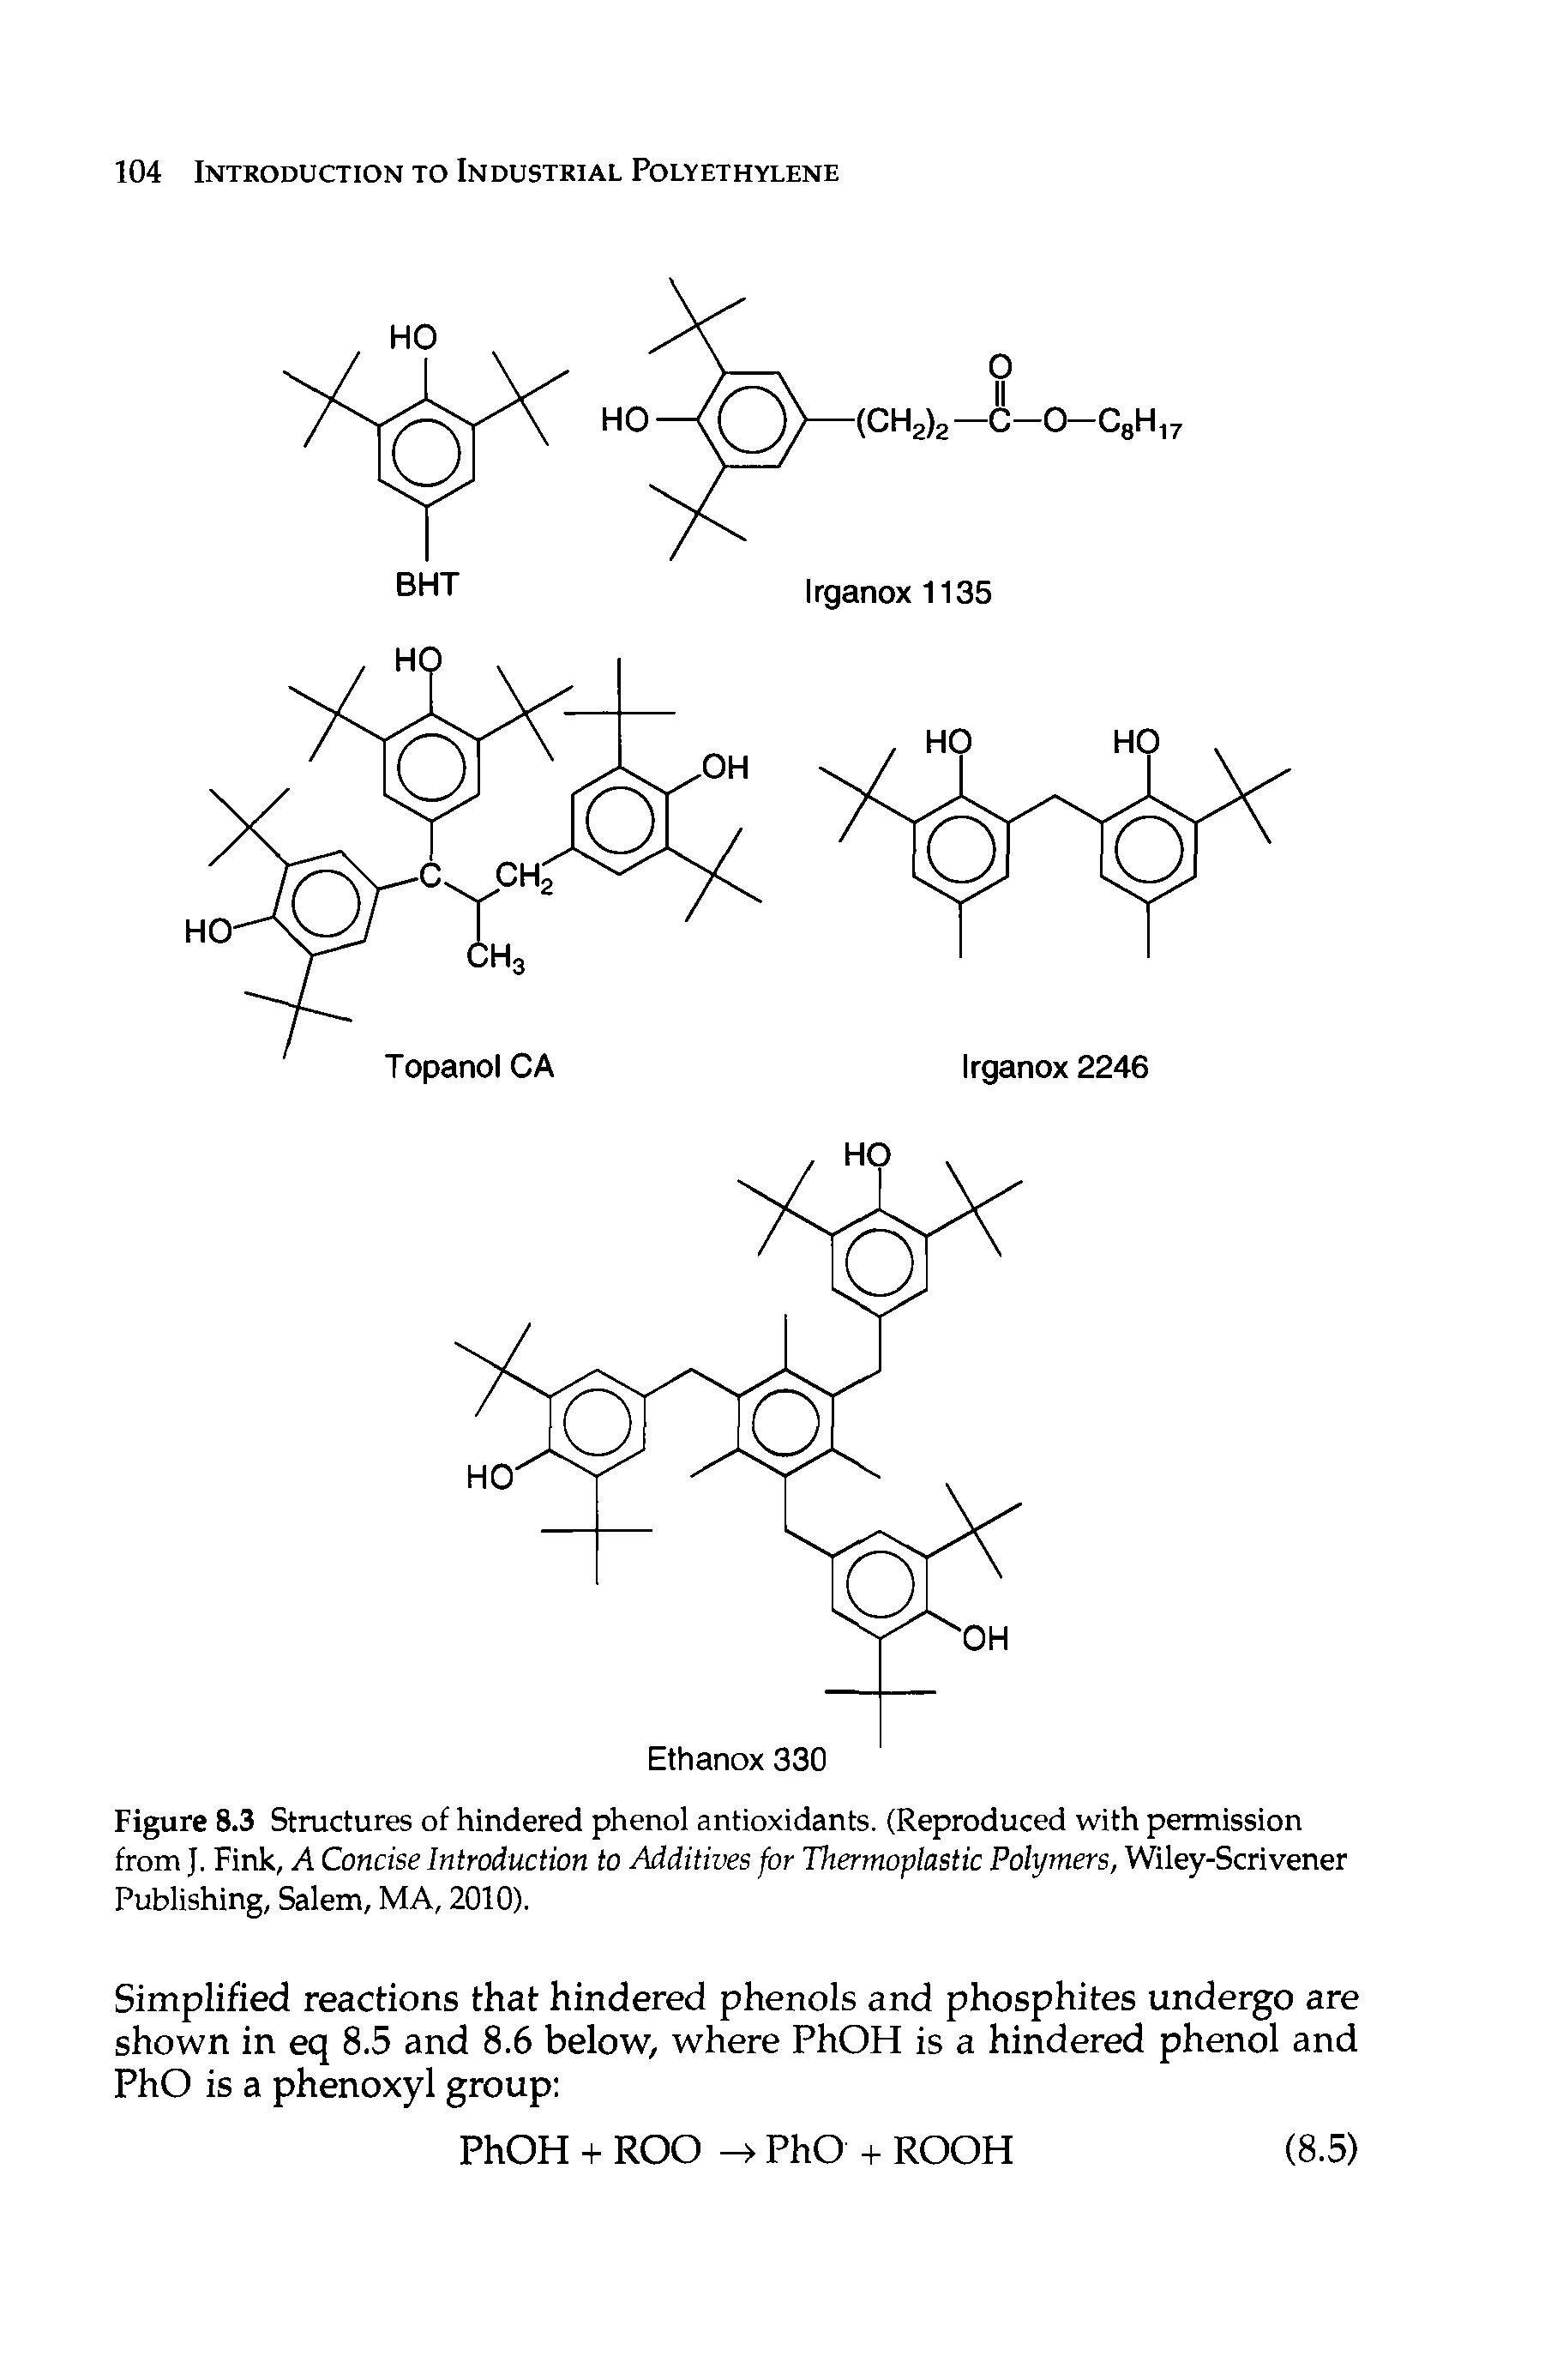 Figure 8.3 Structures of hindered phenol antioxidants. (Reproduced with permission from J. Fink, A Concise Introduction to Additives for Thermoplastic Polymers, Wiley-Scrivener Publishing, Salem, MA, 2010).